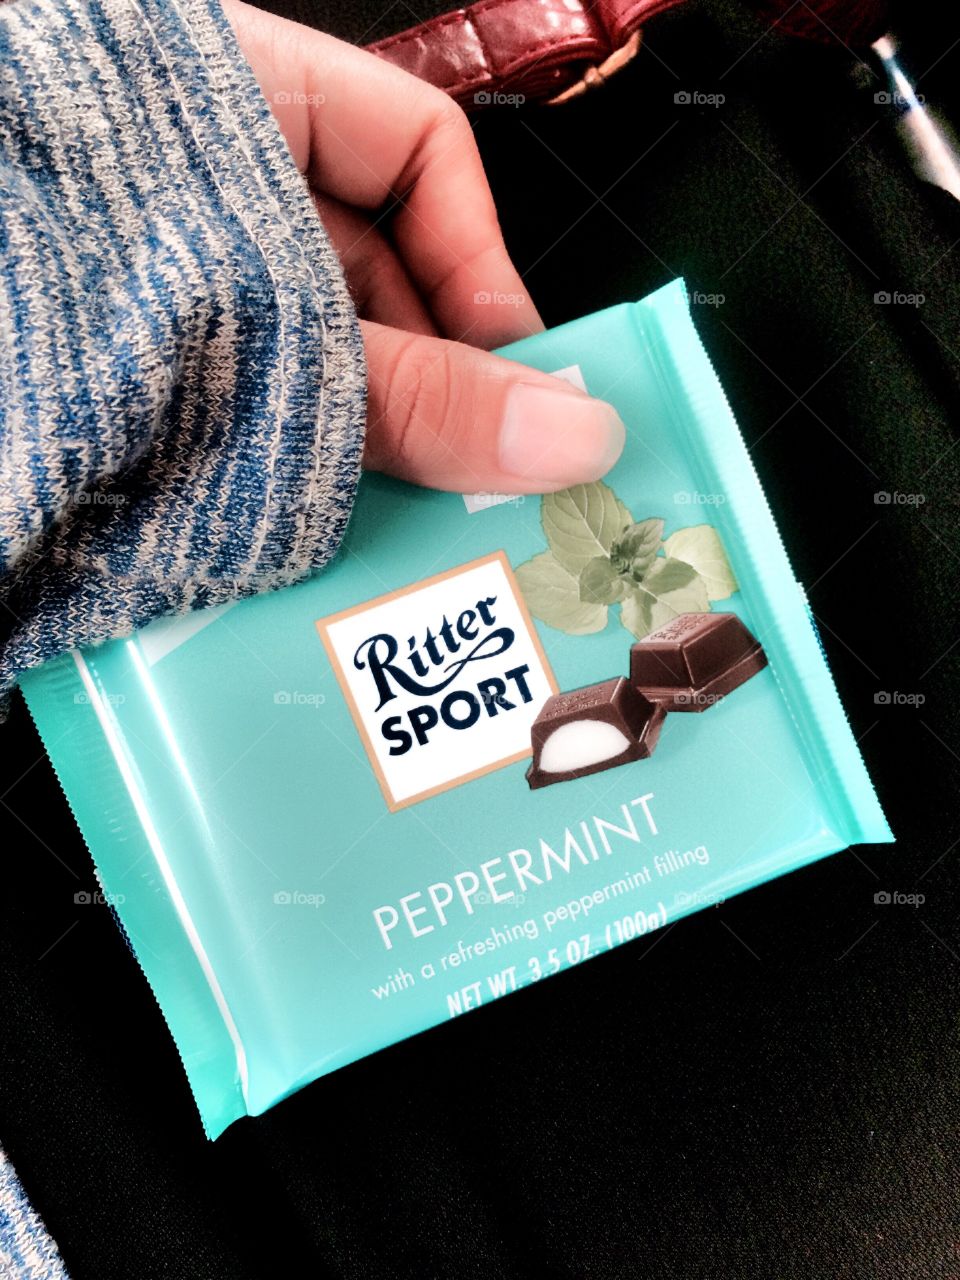 My Fav Chocolate ! Ritter Sport flavour Peppermint ! so Delicious lick fingers ! i like mint , any mint i like , i feel fresh in my mouth . 